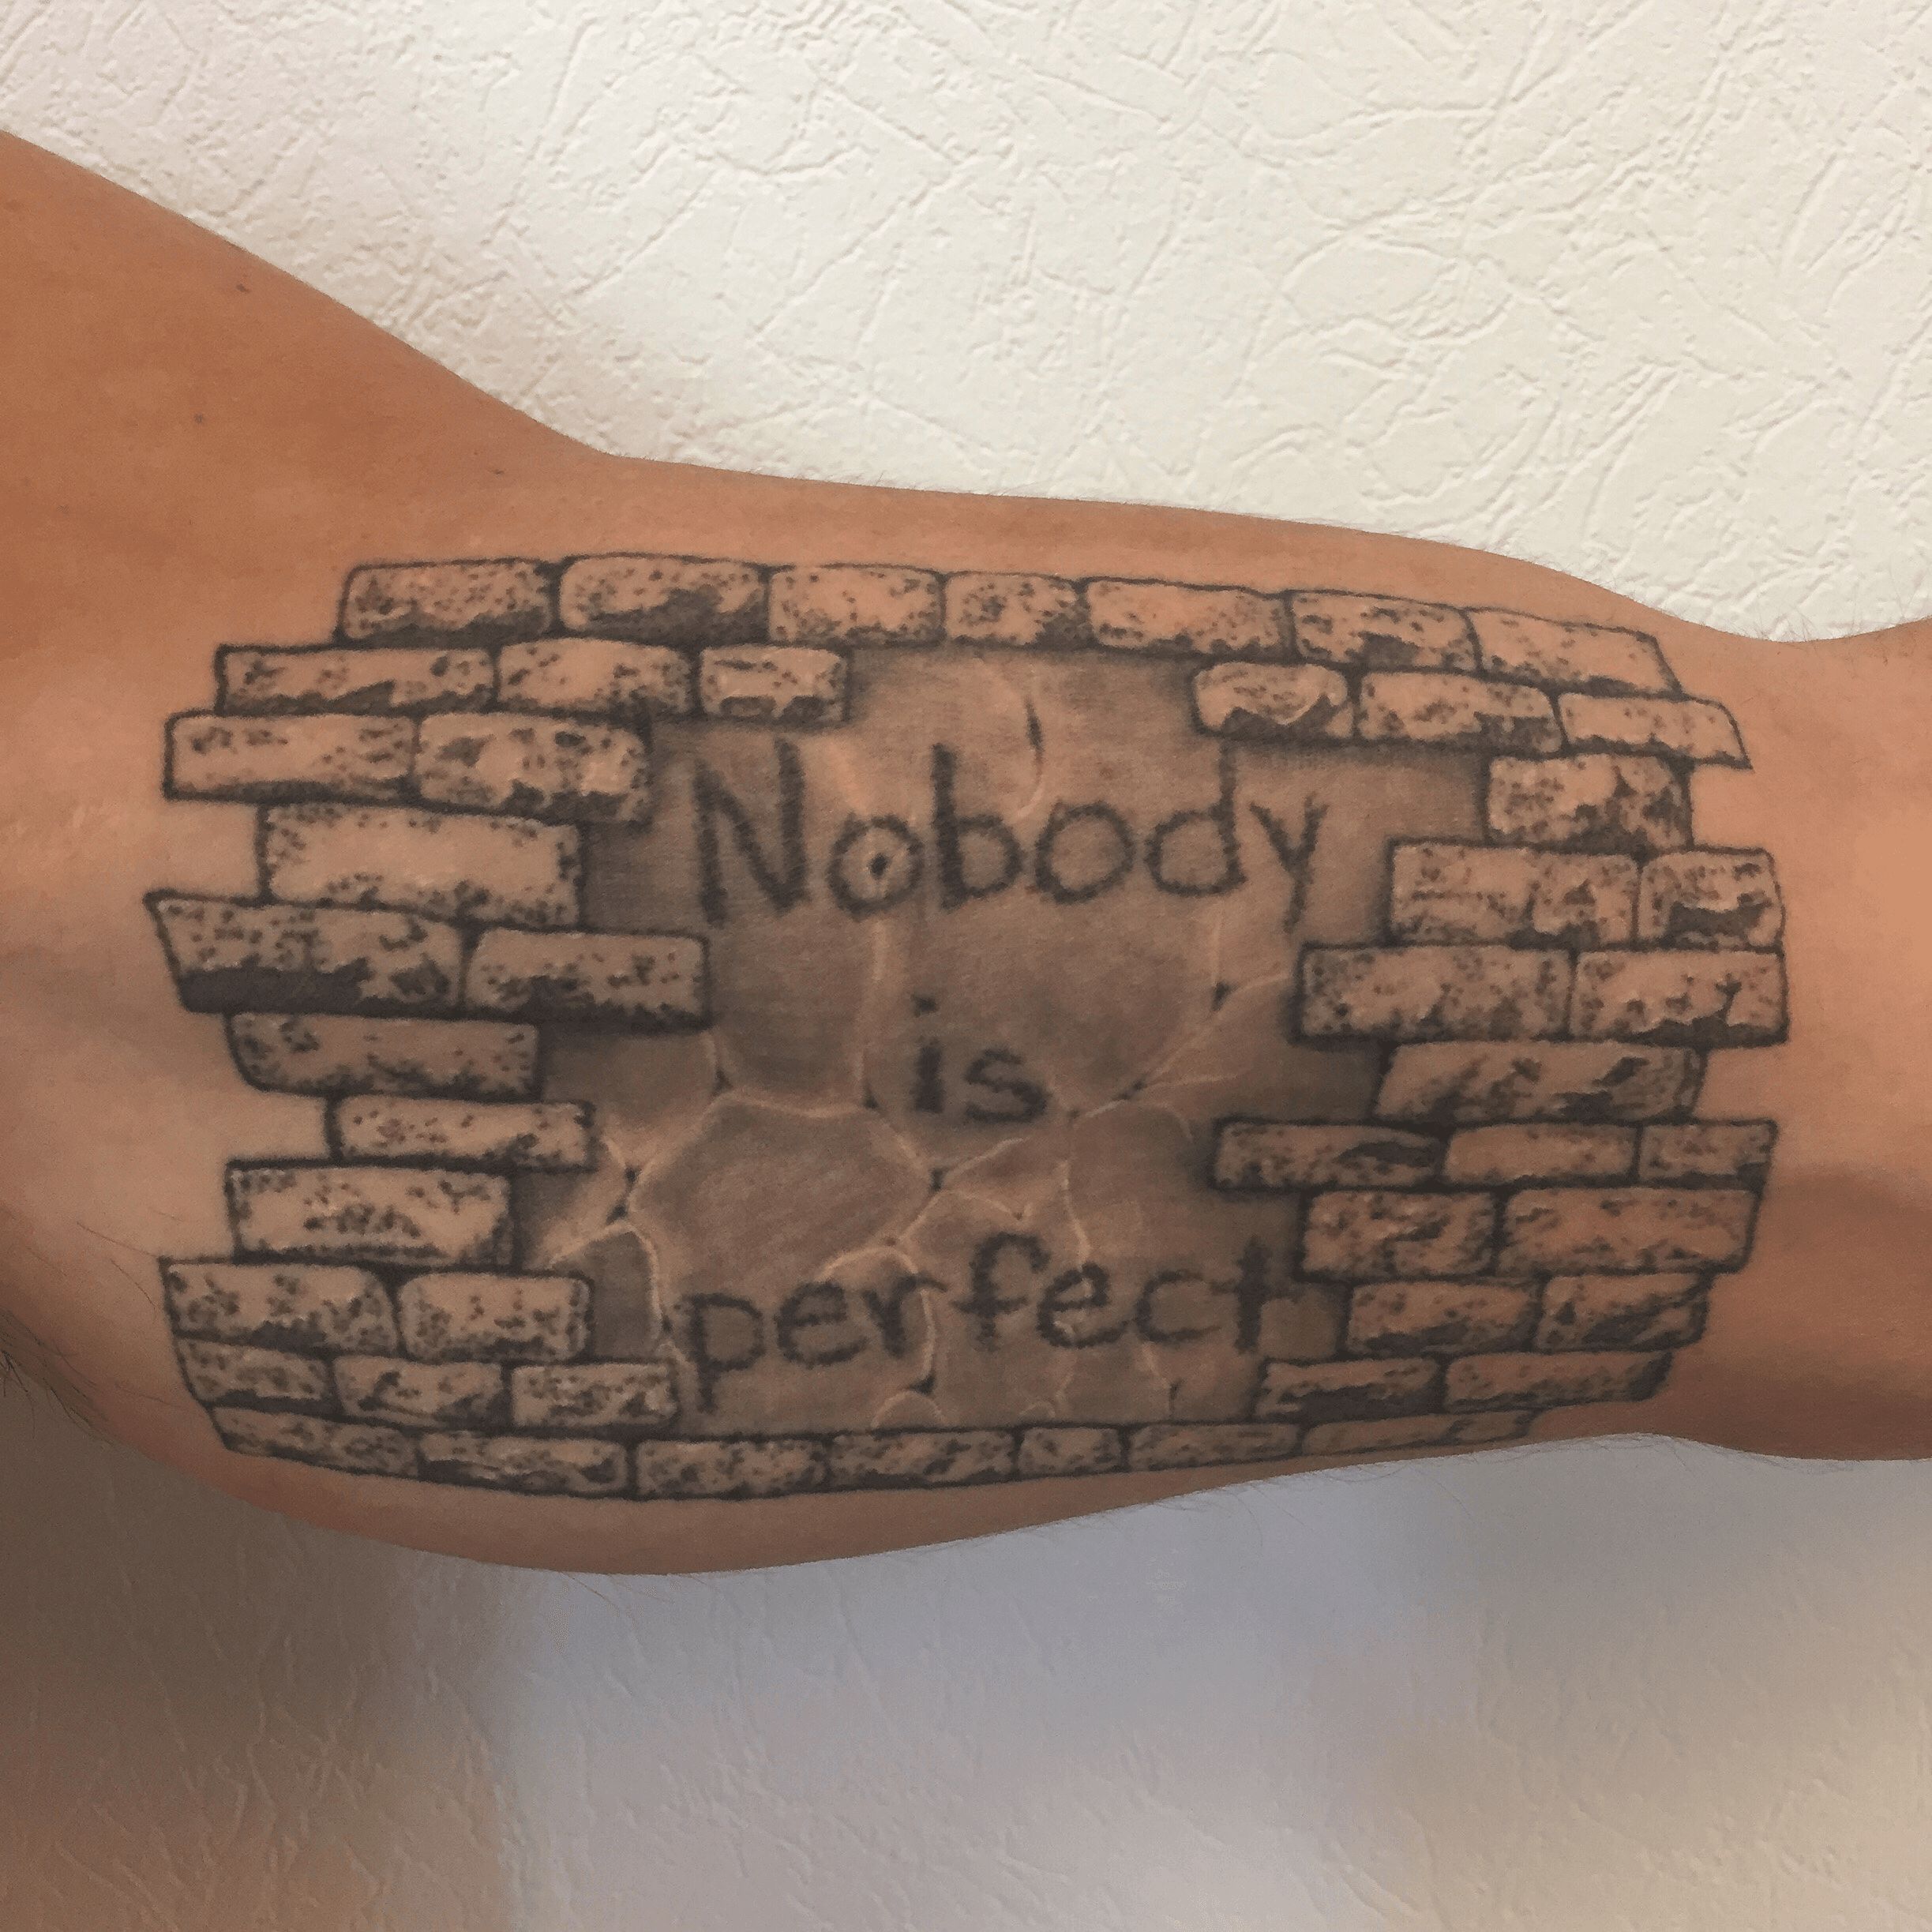 So have been thinking about a tattoo of bricks on my hand Couldnt find  anything online to give me an idea of looks And then I realized my gta  character has the